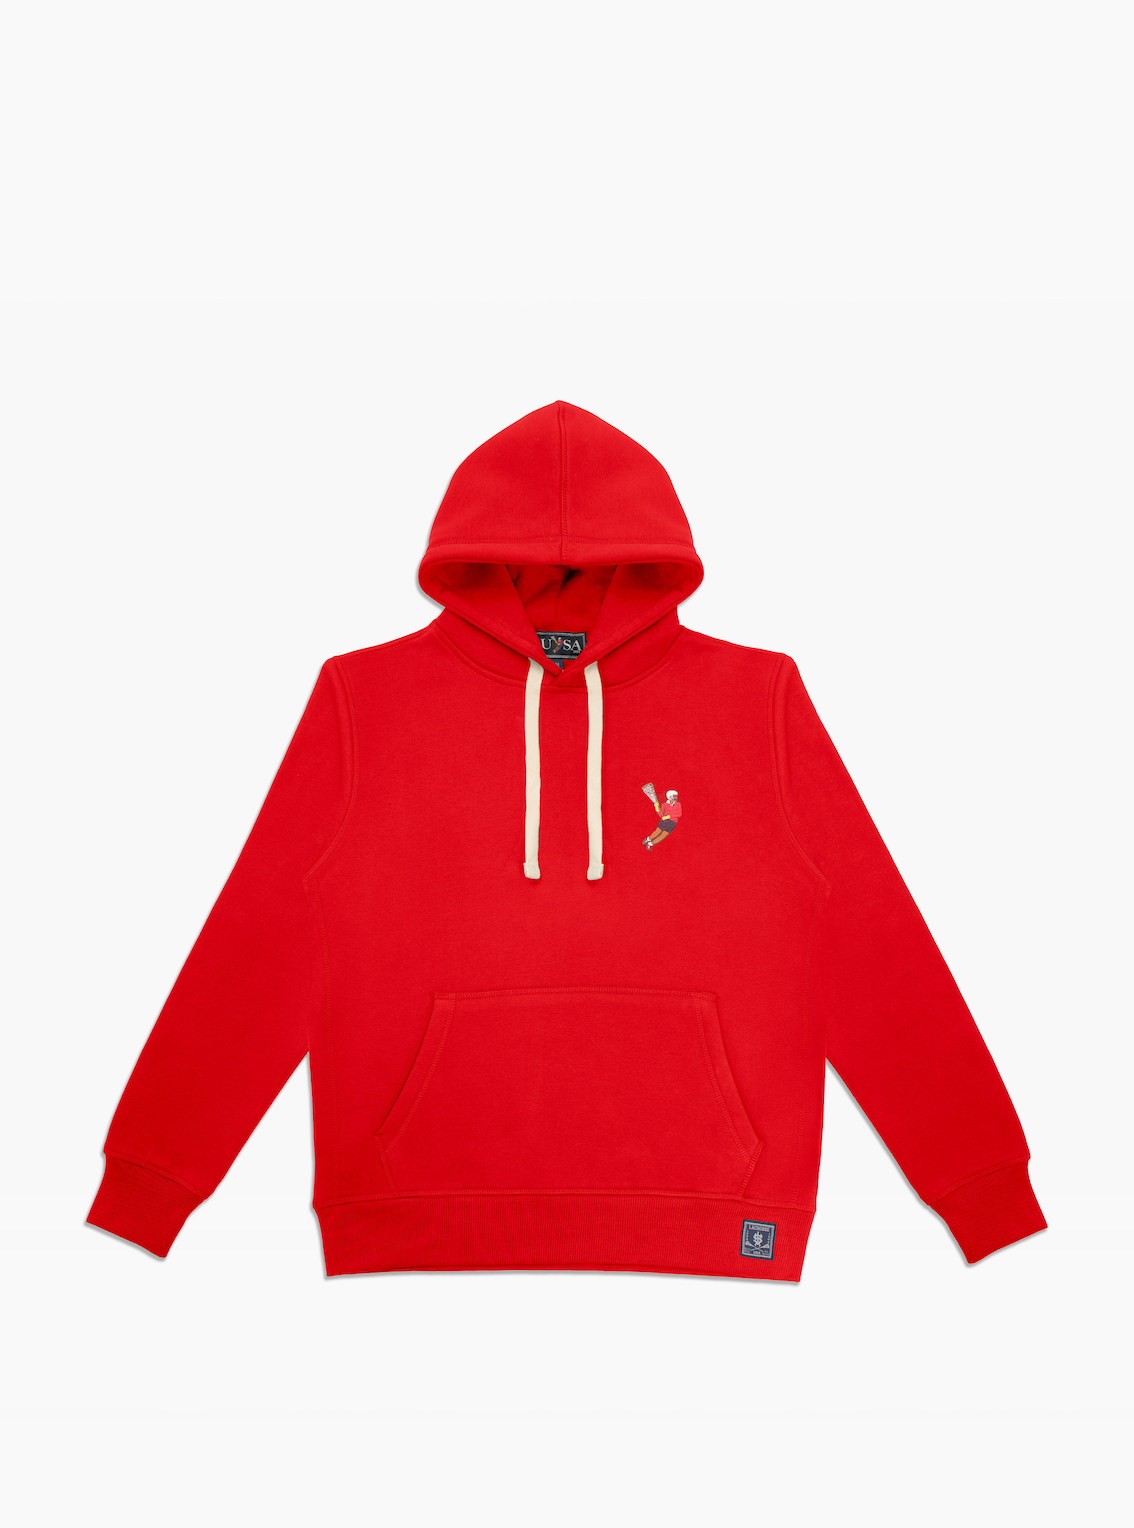 LAX World X Lusa 1904 Red Lacrosse Pullover Hoodie - Front 